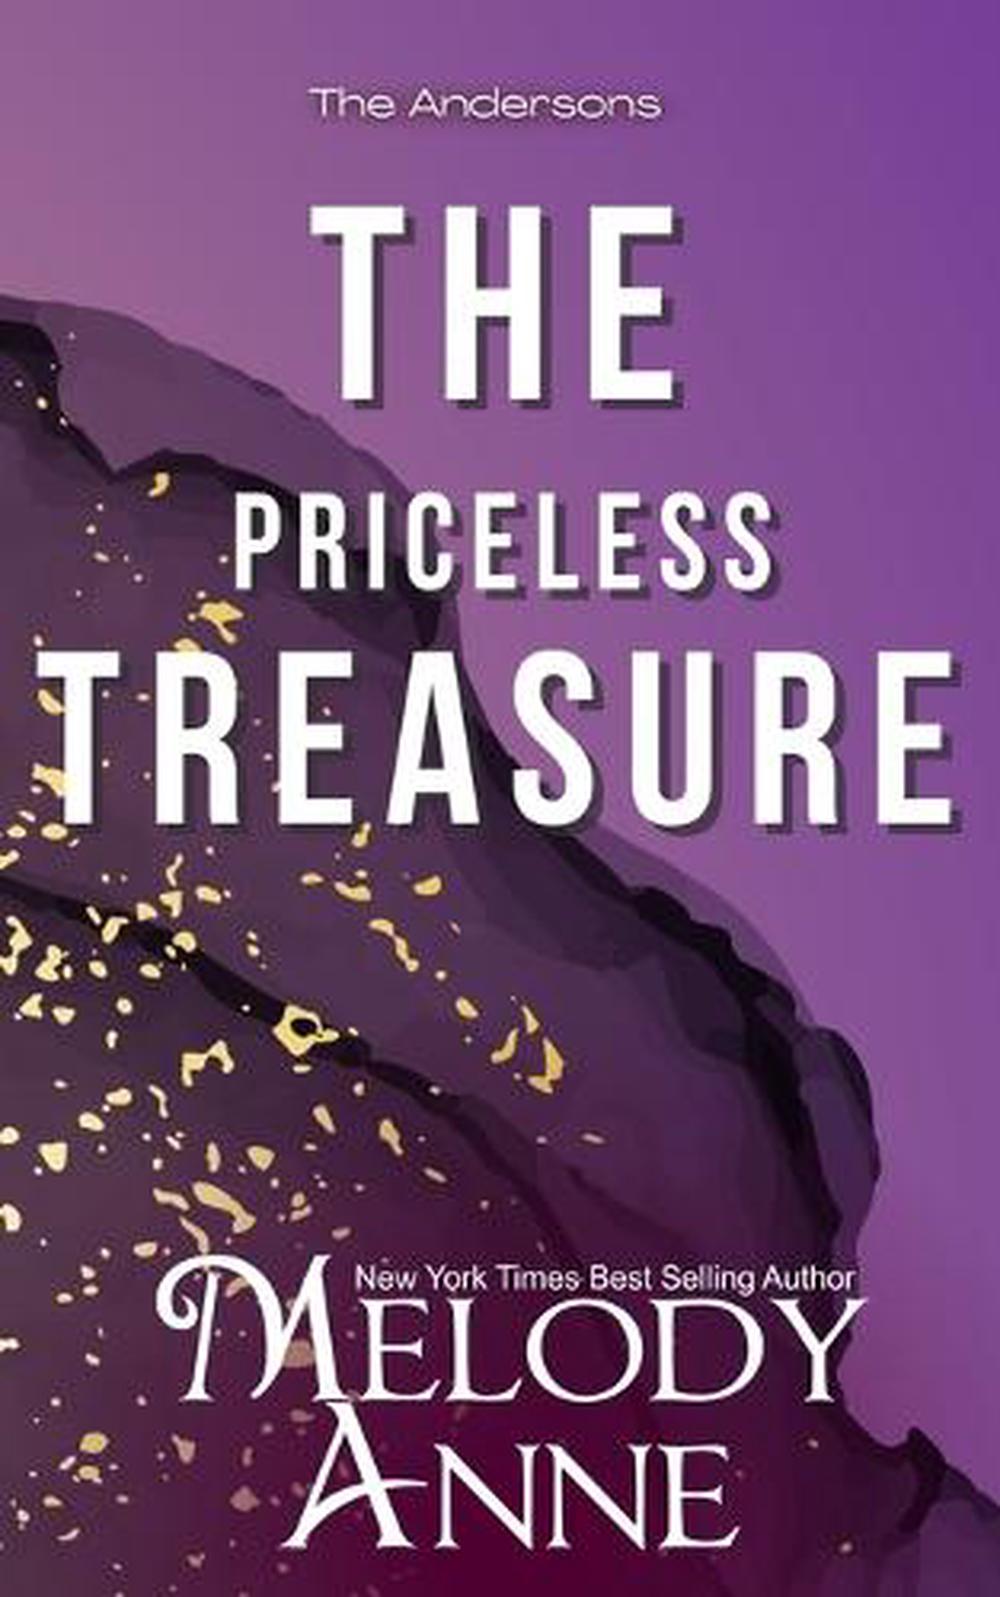 The Last Treasure by Janet S. Anderson